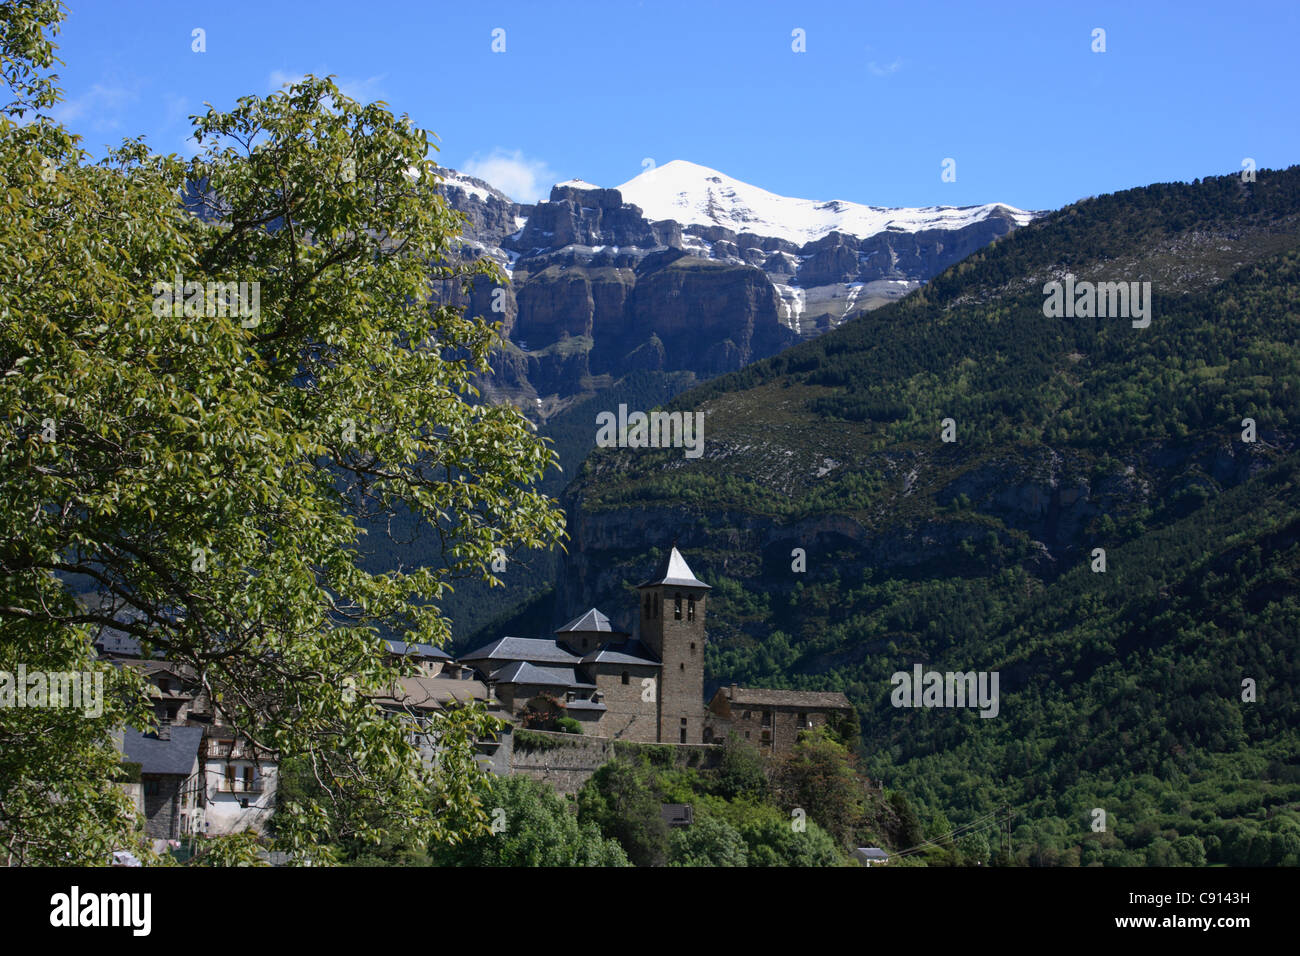 Torla is a village perched on hilltop beneath Mondaruego Mountain which is part of the Huesca Haute Pyrenees range. Torla is a Stock Photo